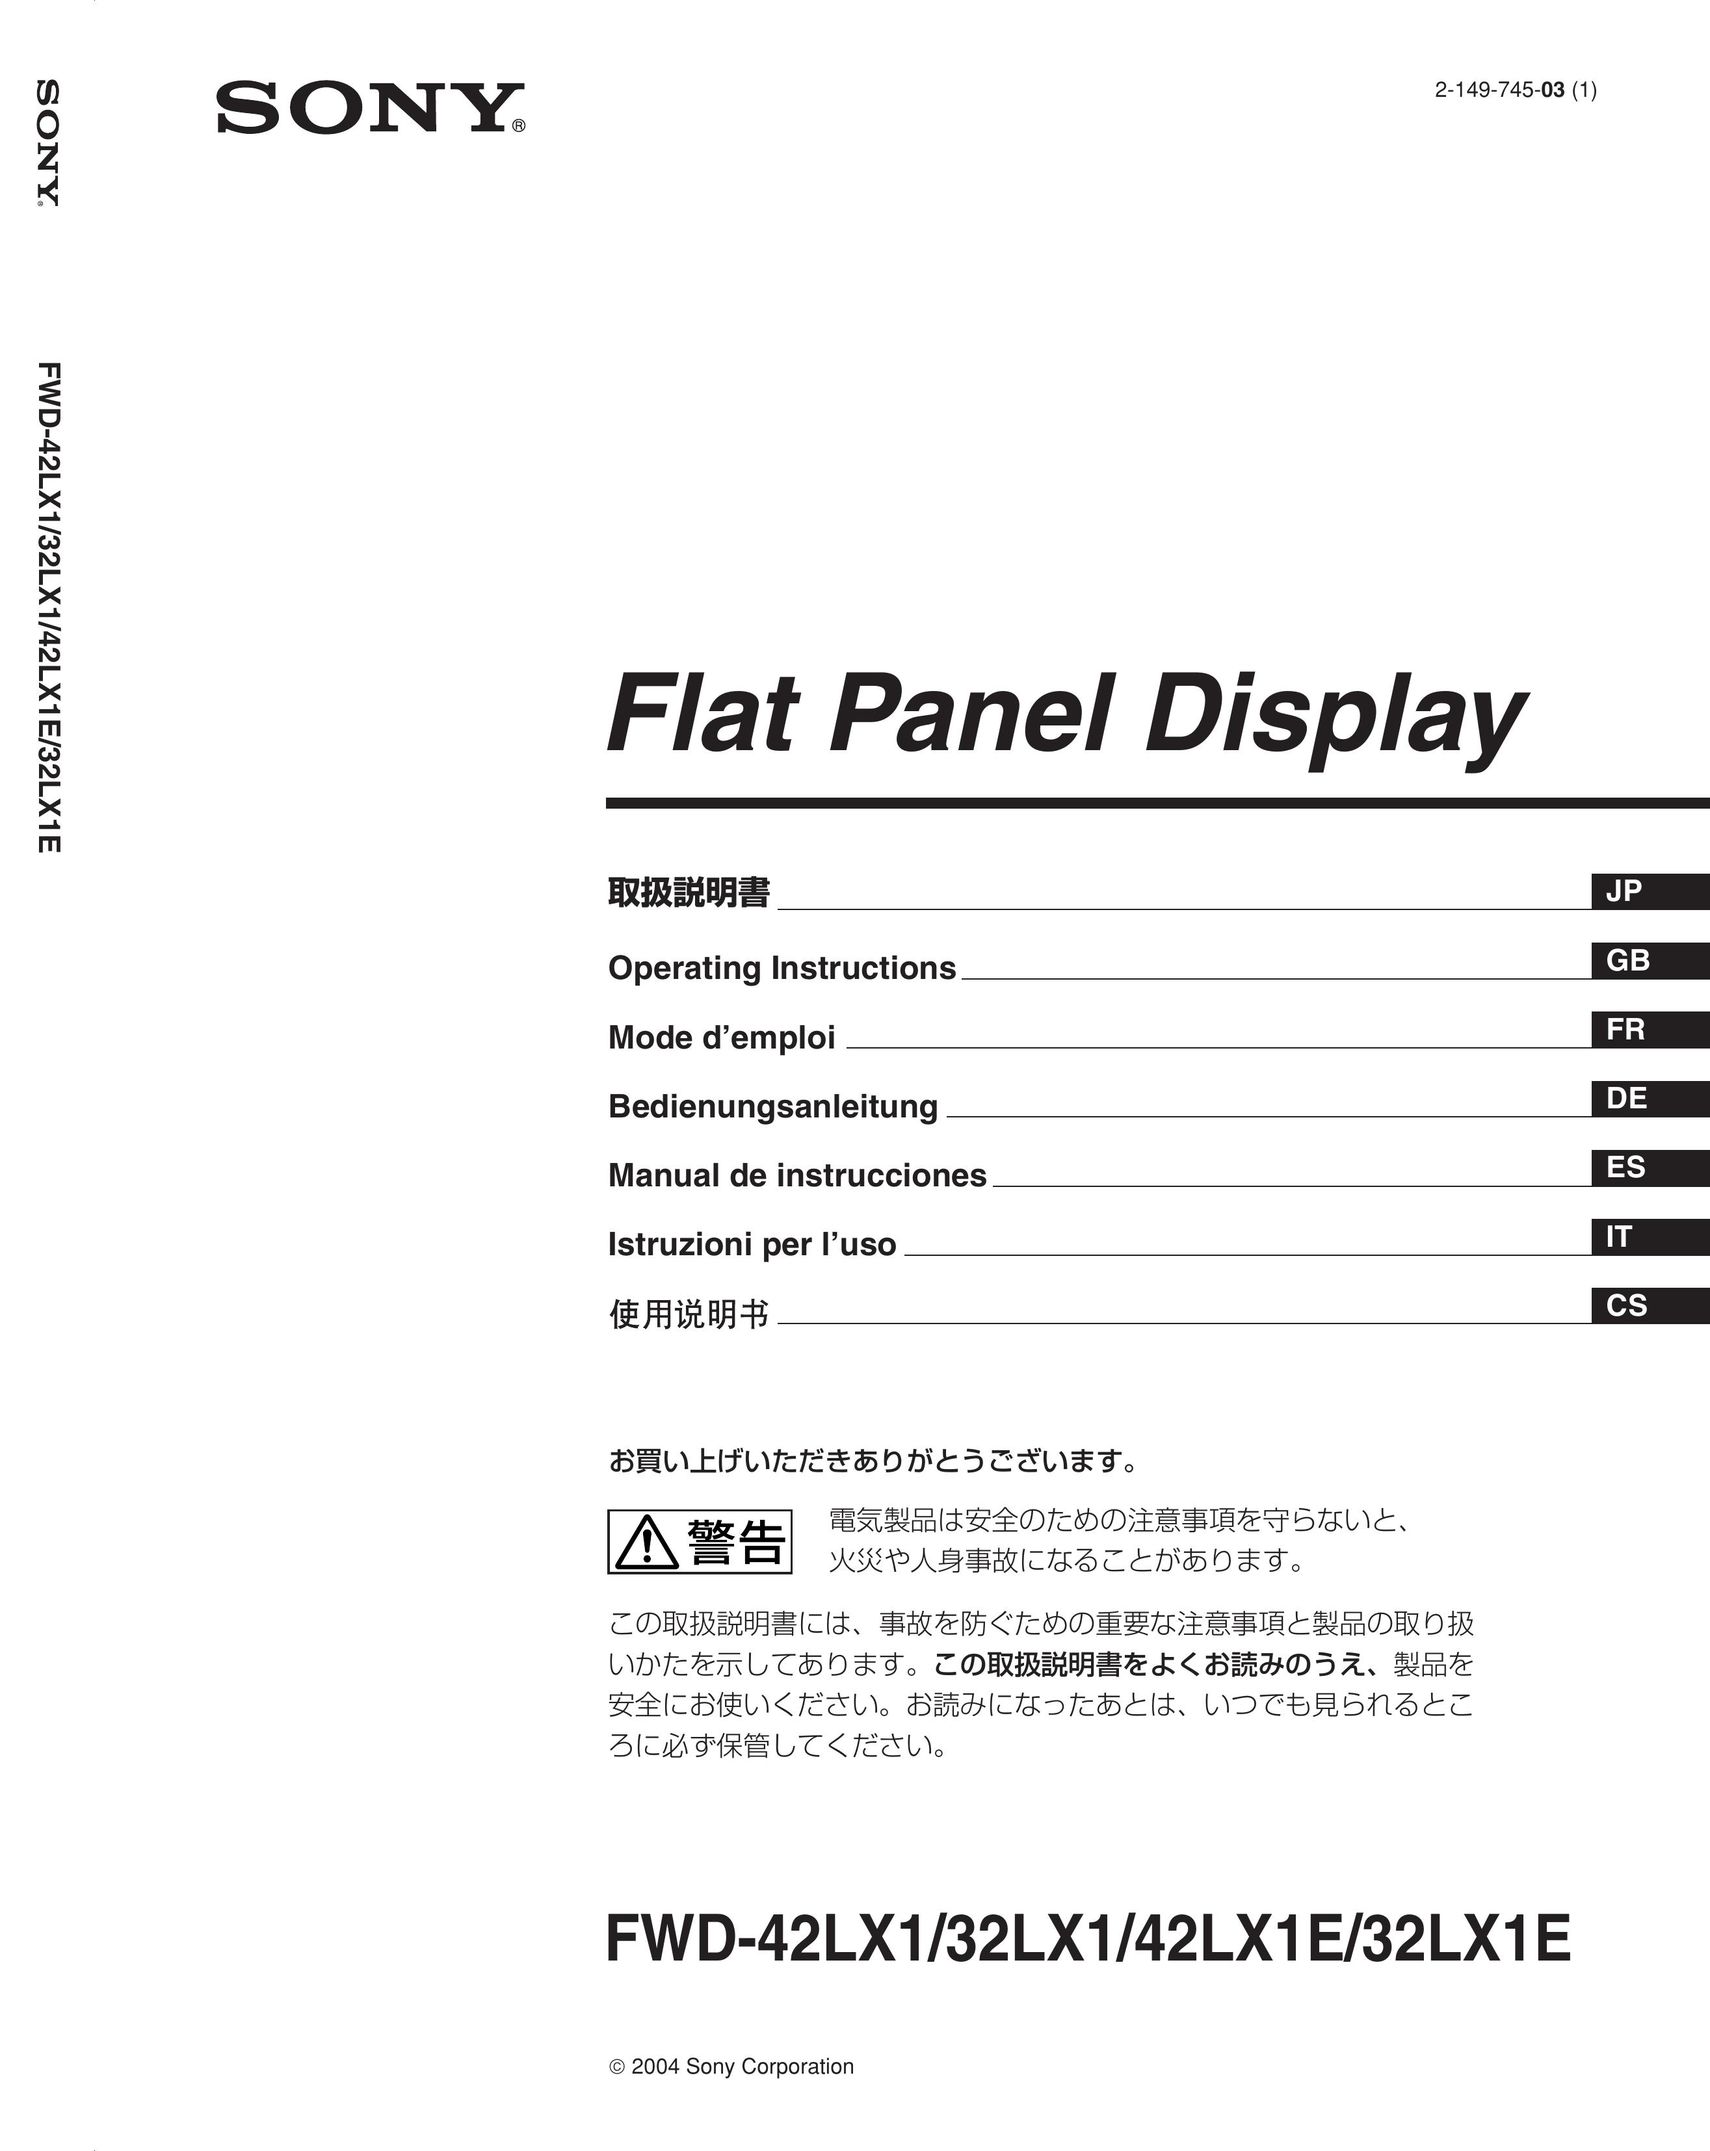 Sony 32LX1 Flat Panel Television User Manual